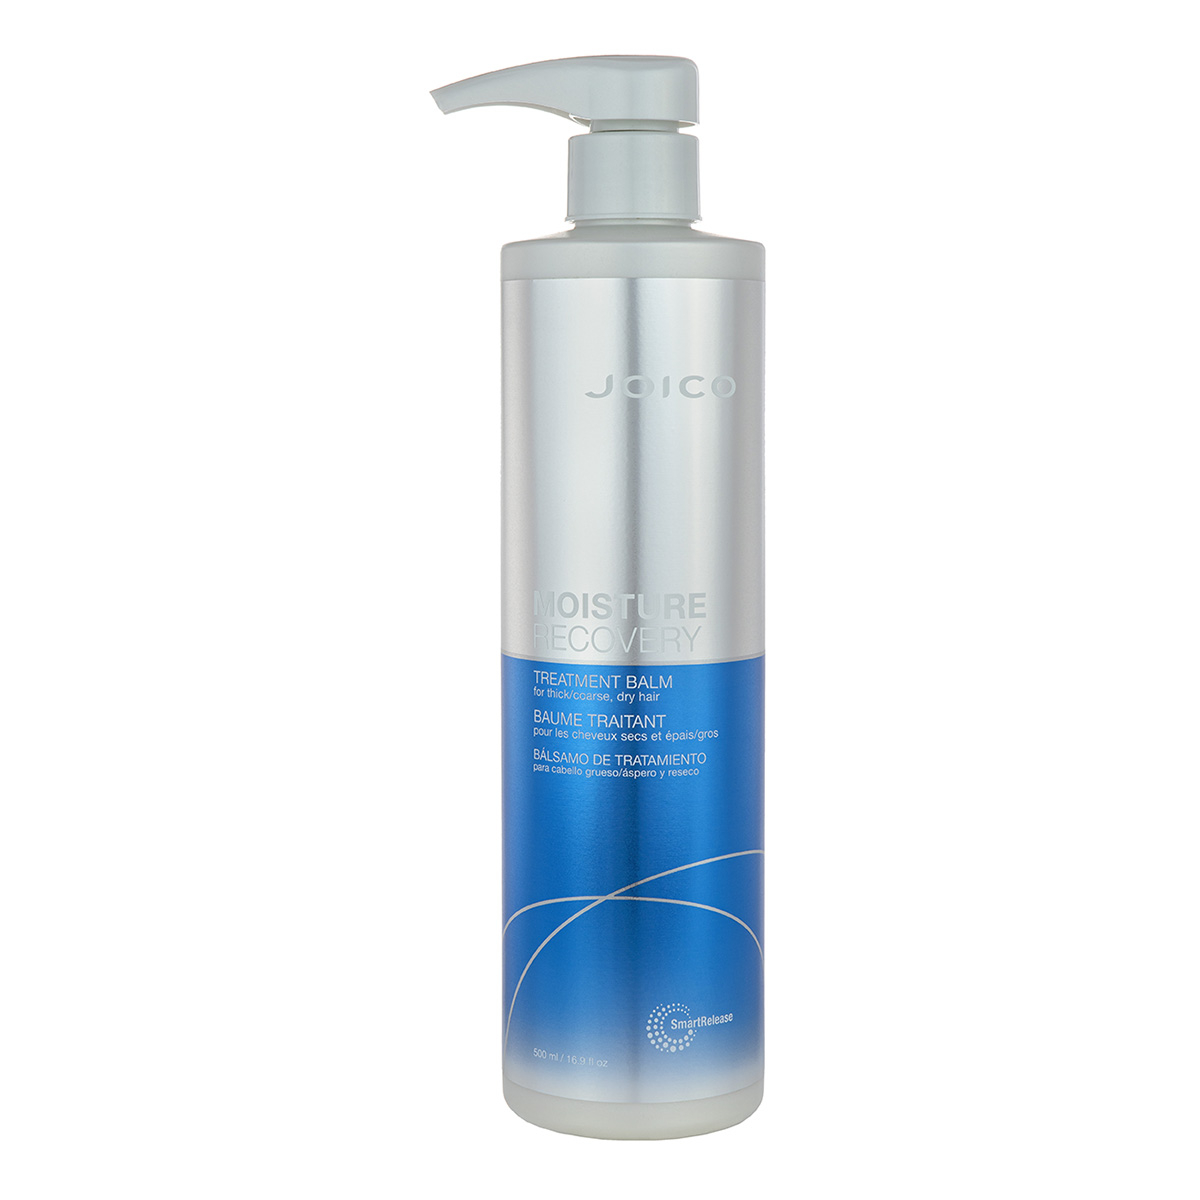 Joico Restage Moisture Recovery Treatment Balm for Dry Hair